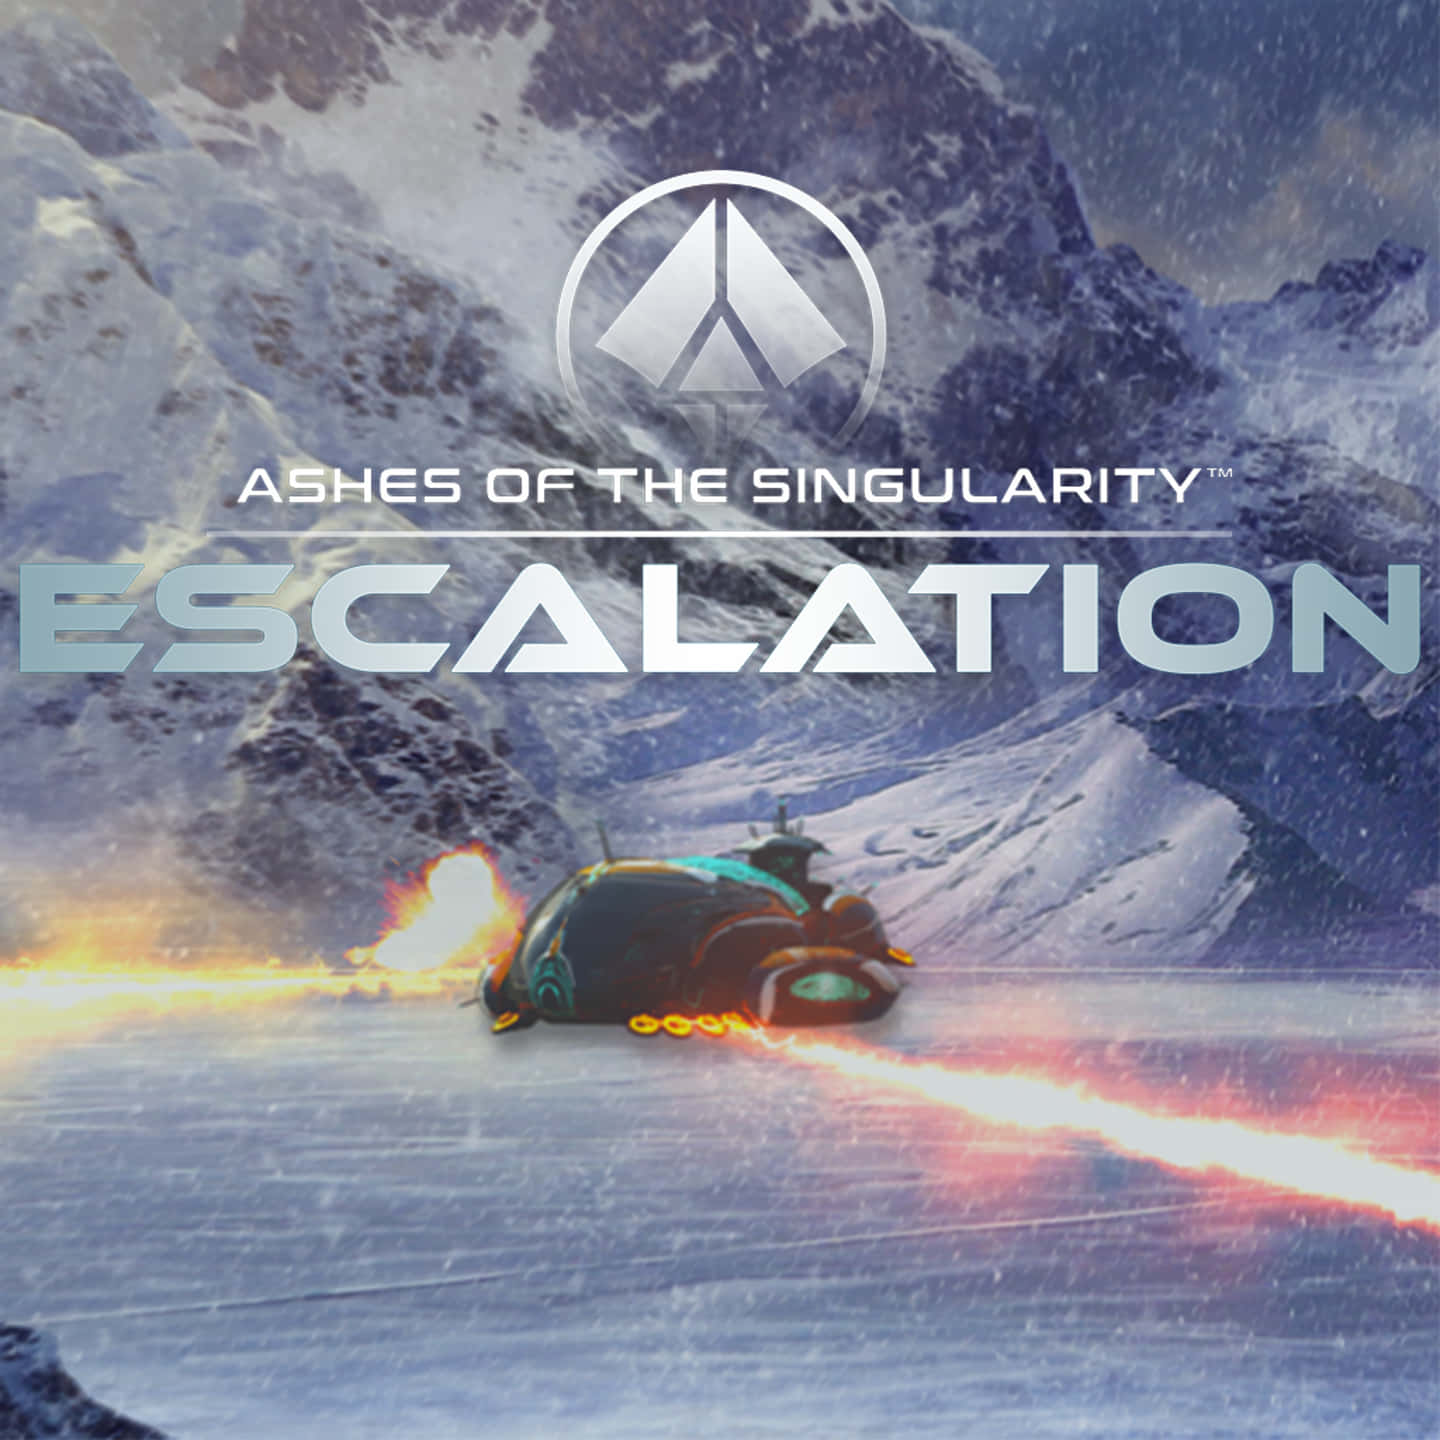 A Poster For Escalation Of The Singularity